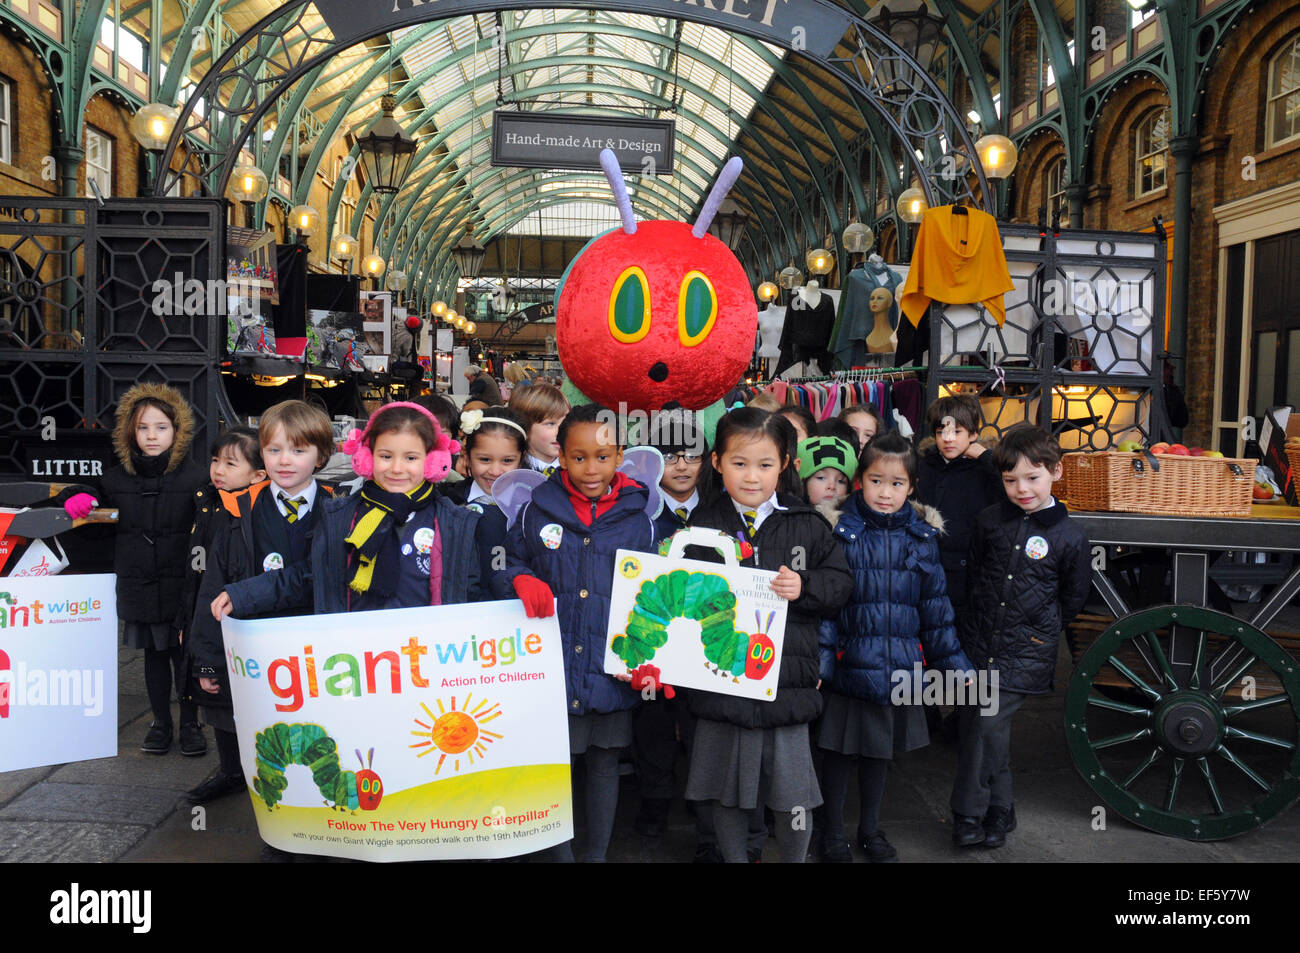 London, UK, 27 January 2015, Pupils from ST Clement's Dabes school. London's historic Apple Market in Covent Garden was transformed into a scene from The Very Hungry Caterpillar as TV presenter Laura Hamilton with one year old son Rocco and pupils from ST Clements Danes school teamed up with leading charity Action for Children to launch the annual fundraising campaign for children, The Giant Wiggle, taking place on 19 March . Credit:  JOHNNY ARMSTEAD/Alamy Live News Stock Photo